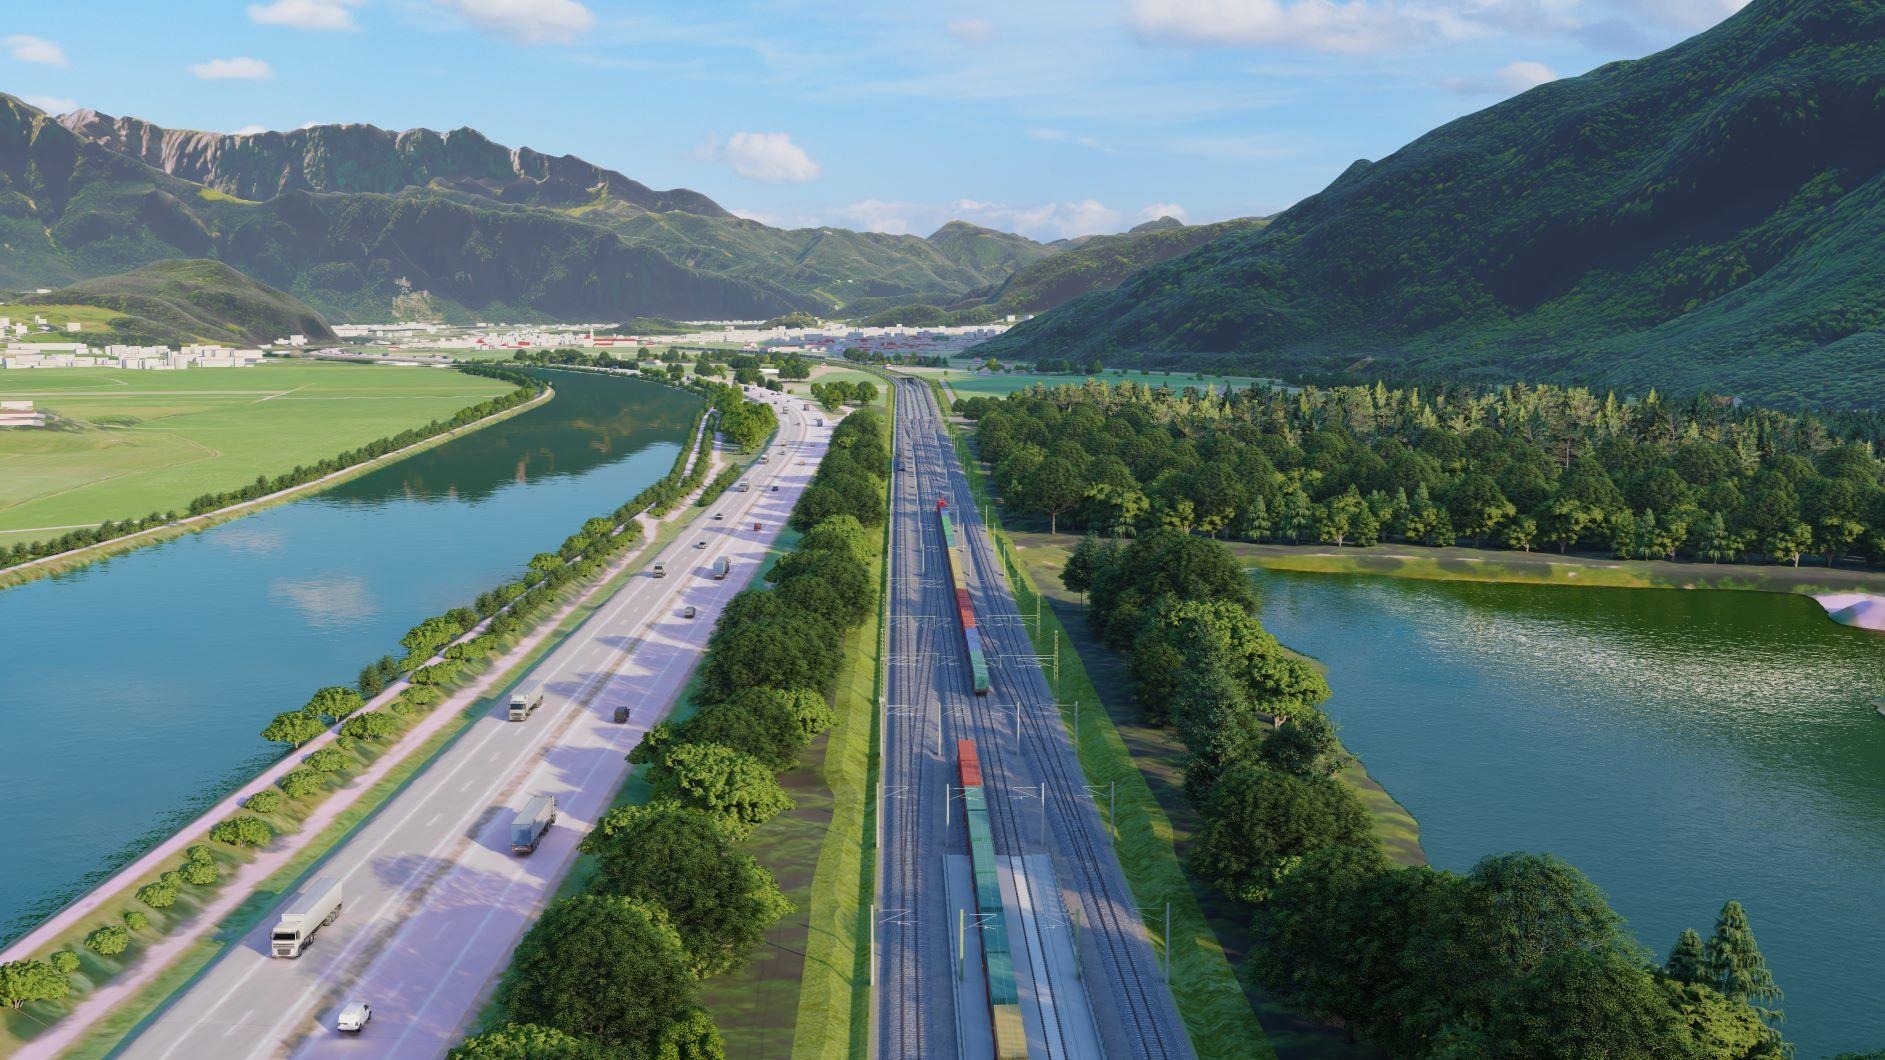 Rendering of the northern approach route for the Brenner Base Tunnel